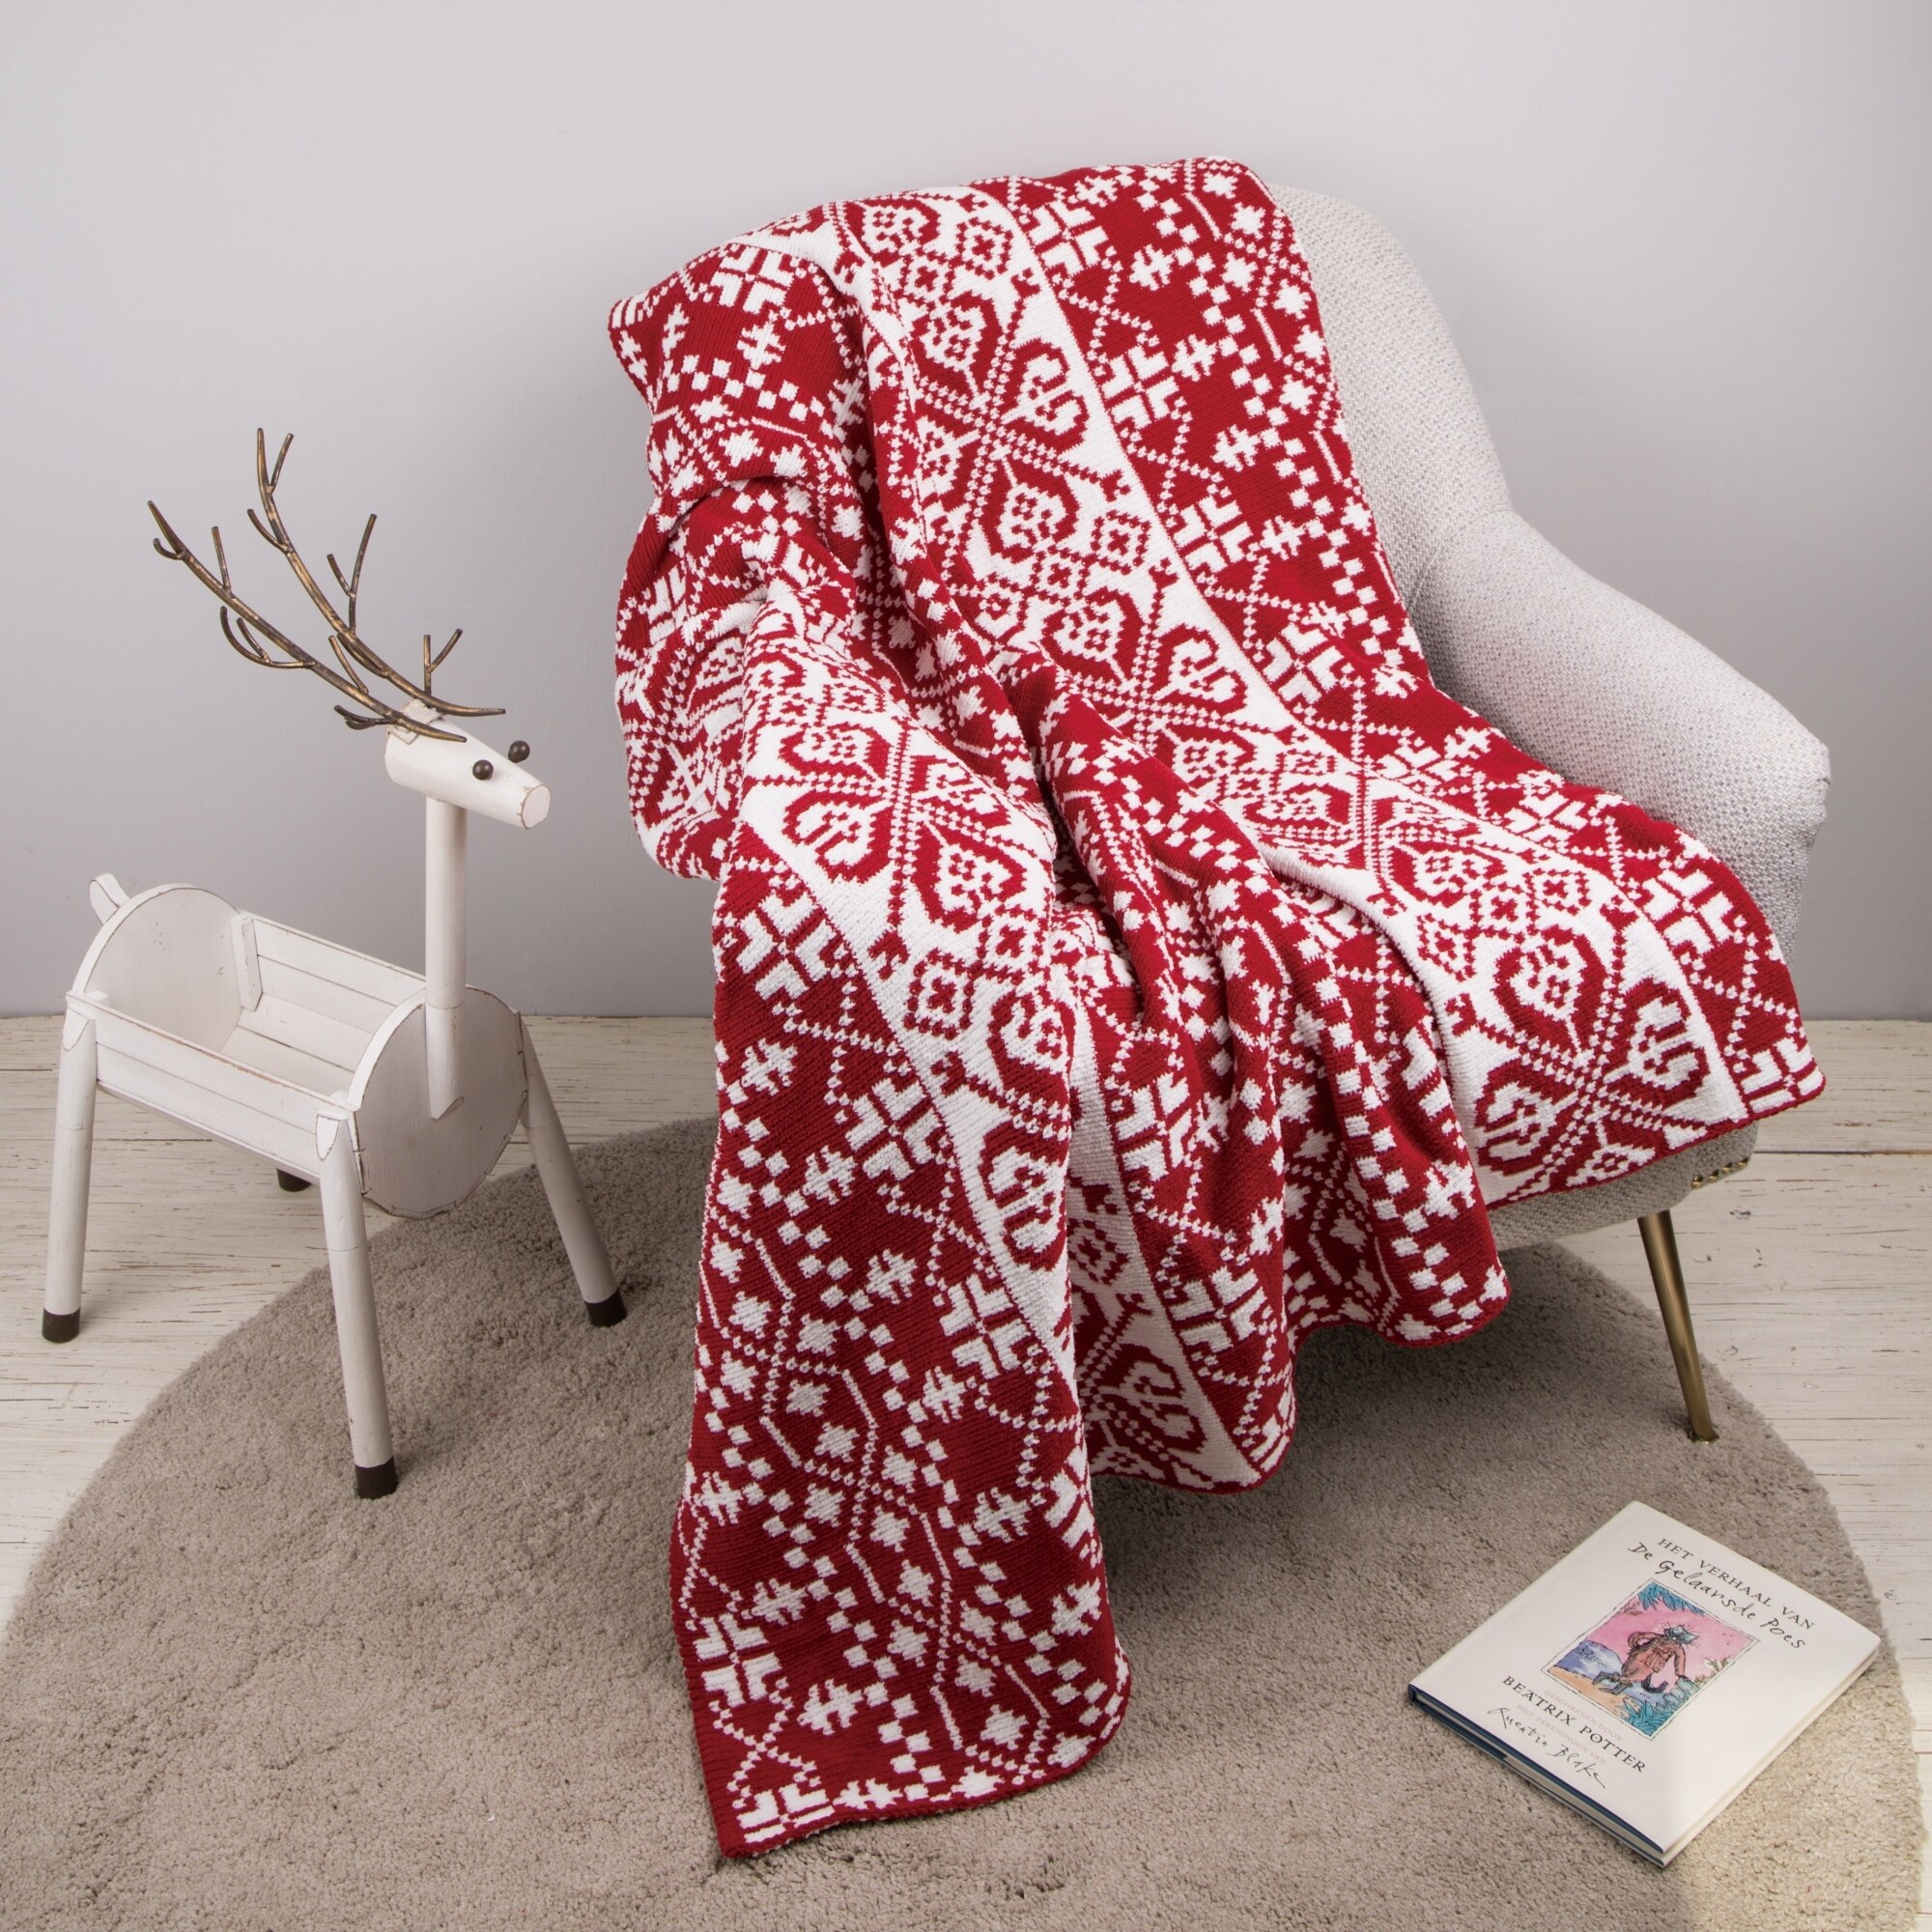 Glitzhome 60L50W Christmas Knitted Throw Blanket Overstock 28872664